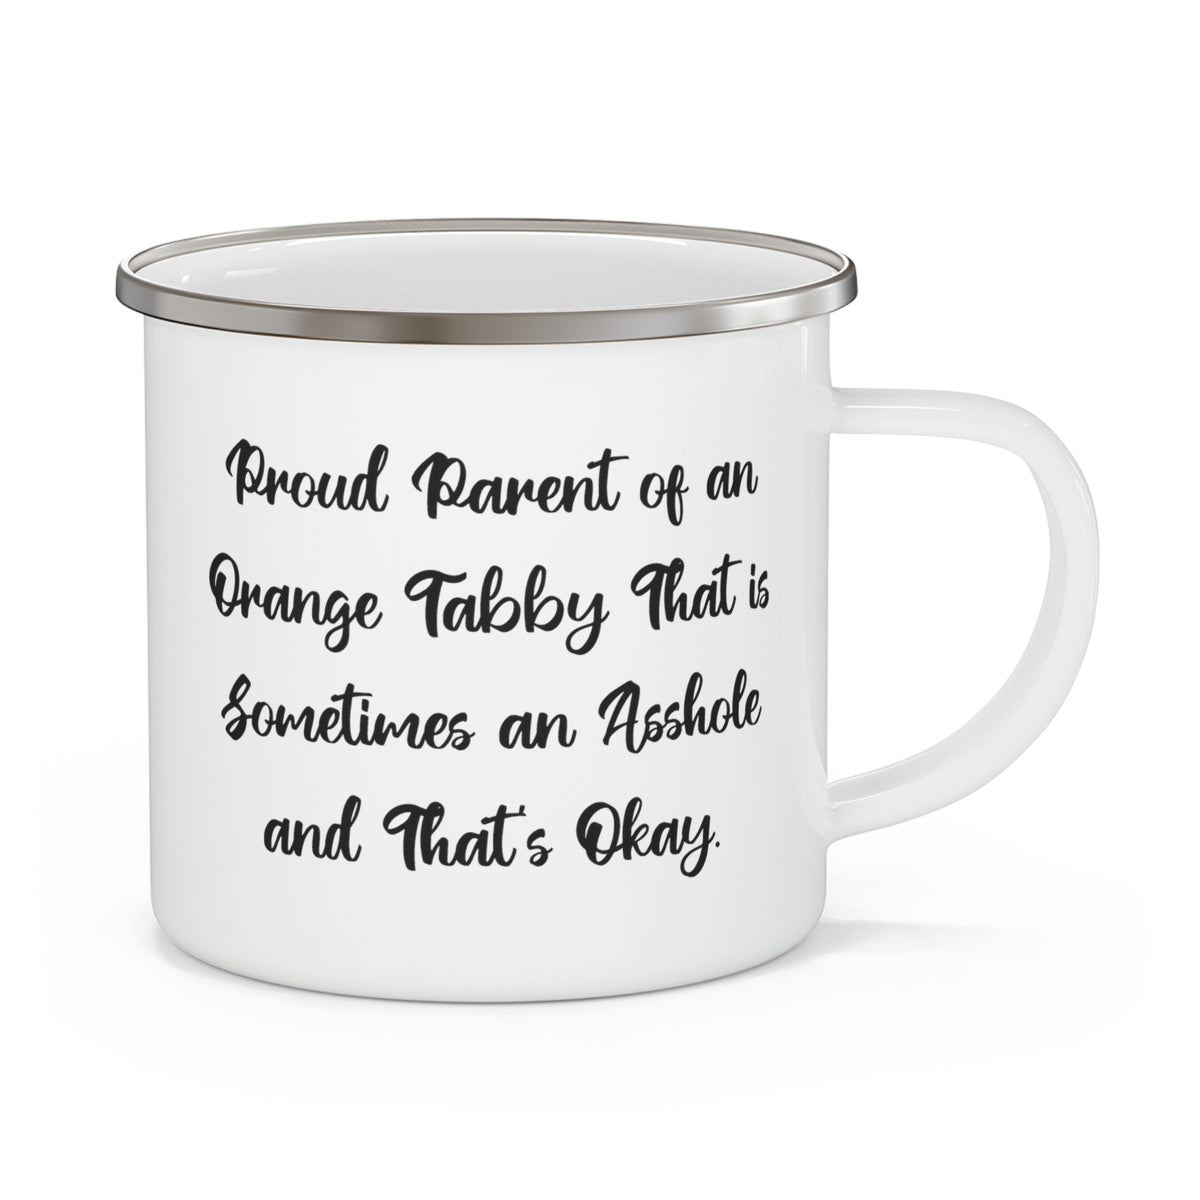 Fun Orange Tabby Cat Gifts, Proud Parent of an Orange Tabby That is Sometimes an, Fancy Holiday 12oz Camper Mug From Friends, Funny orange tabby cat mug, Orange tabby cat mug, Tabby cat mug